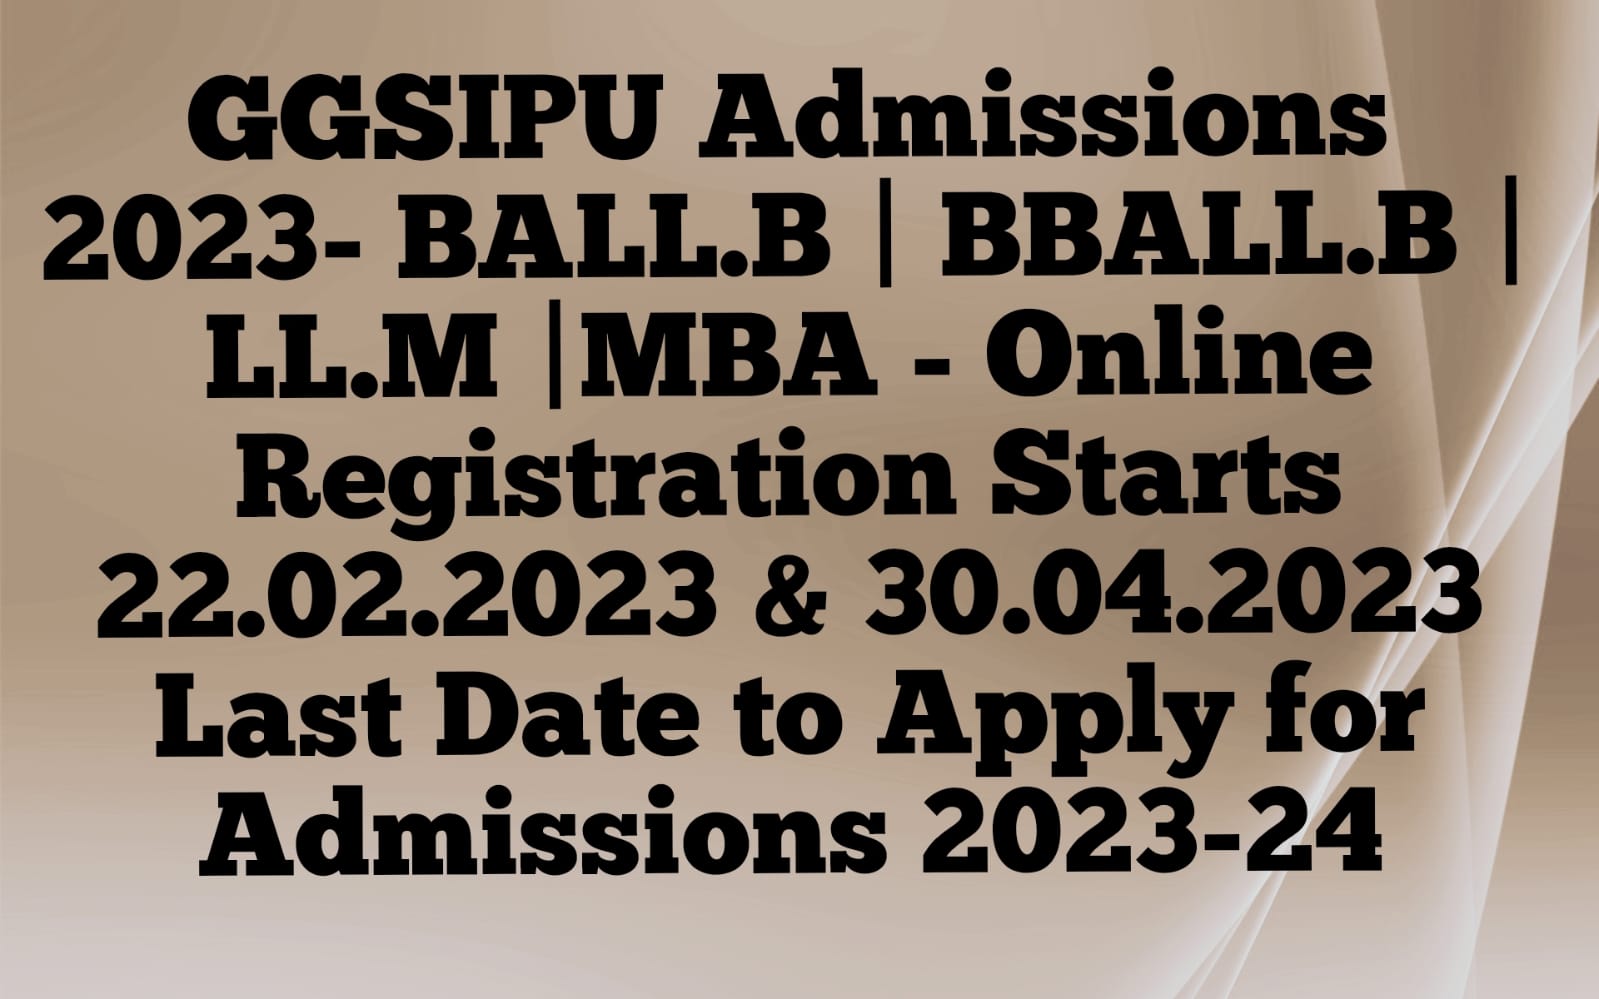 GGSIPU Admissions 2023- BALLB | BBALLB | LLM |MBA - Online Registration Starts 22 02 2023 & 30 04 2023 Last Date to Apply for Admissions 2023-24